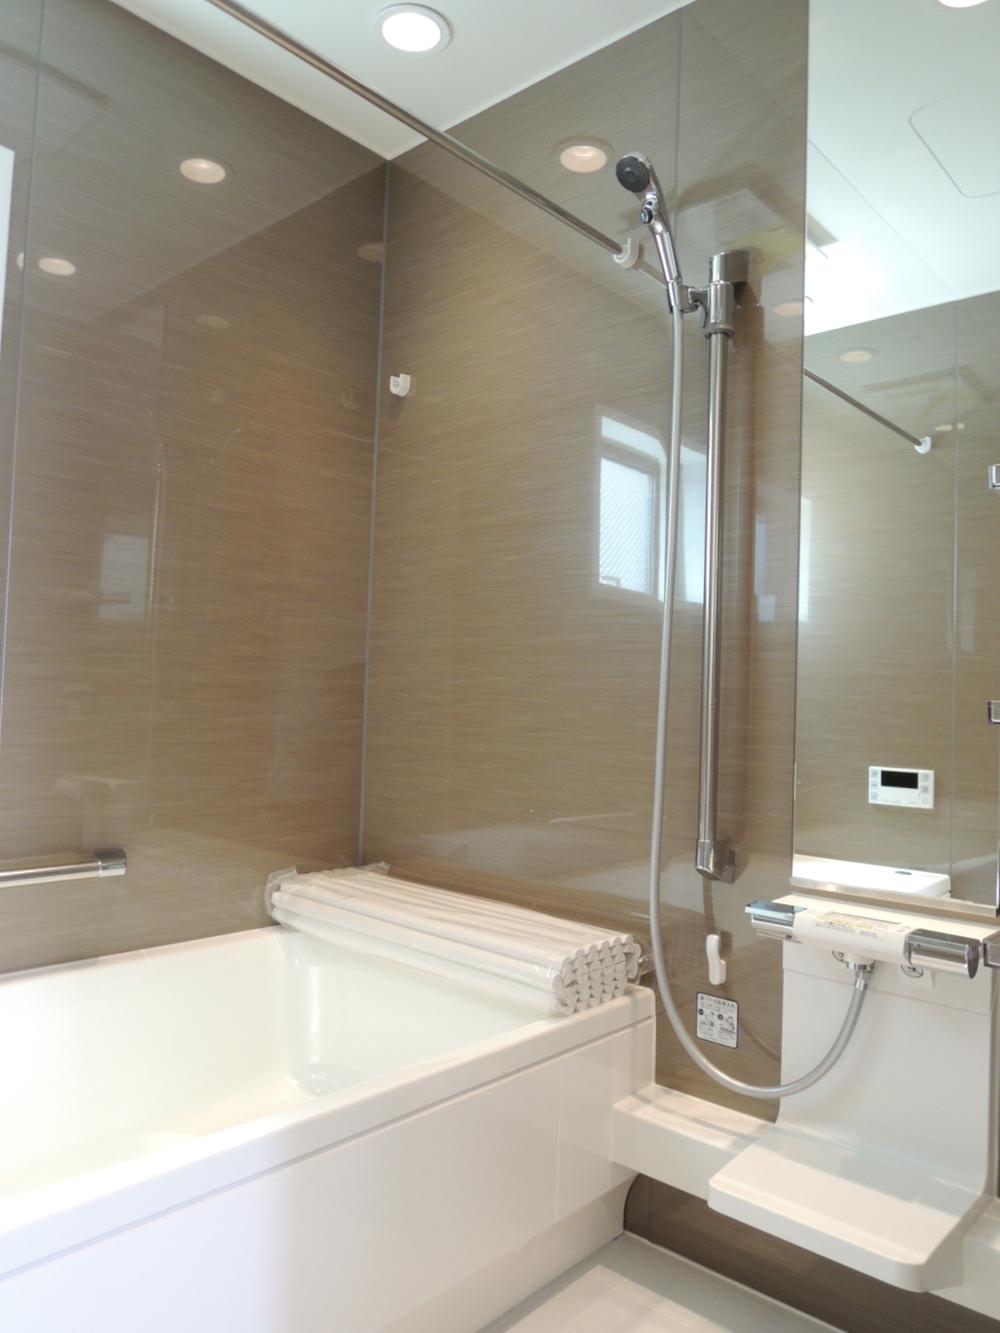 Same specifications photo (bathroom). With bathroom ventilation dryer (same specifications)